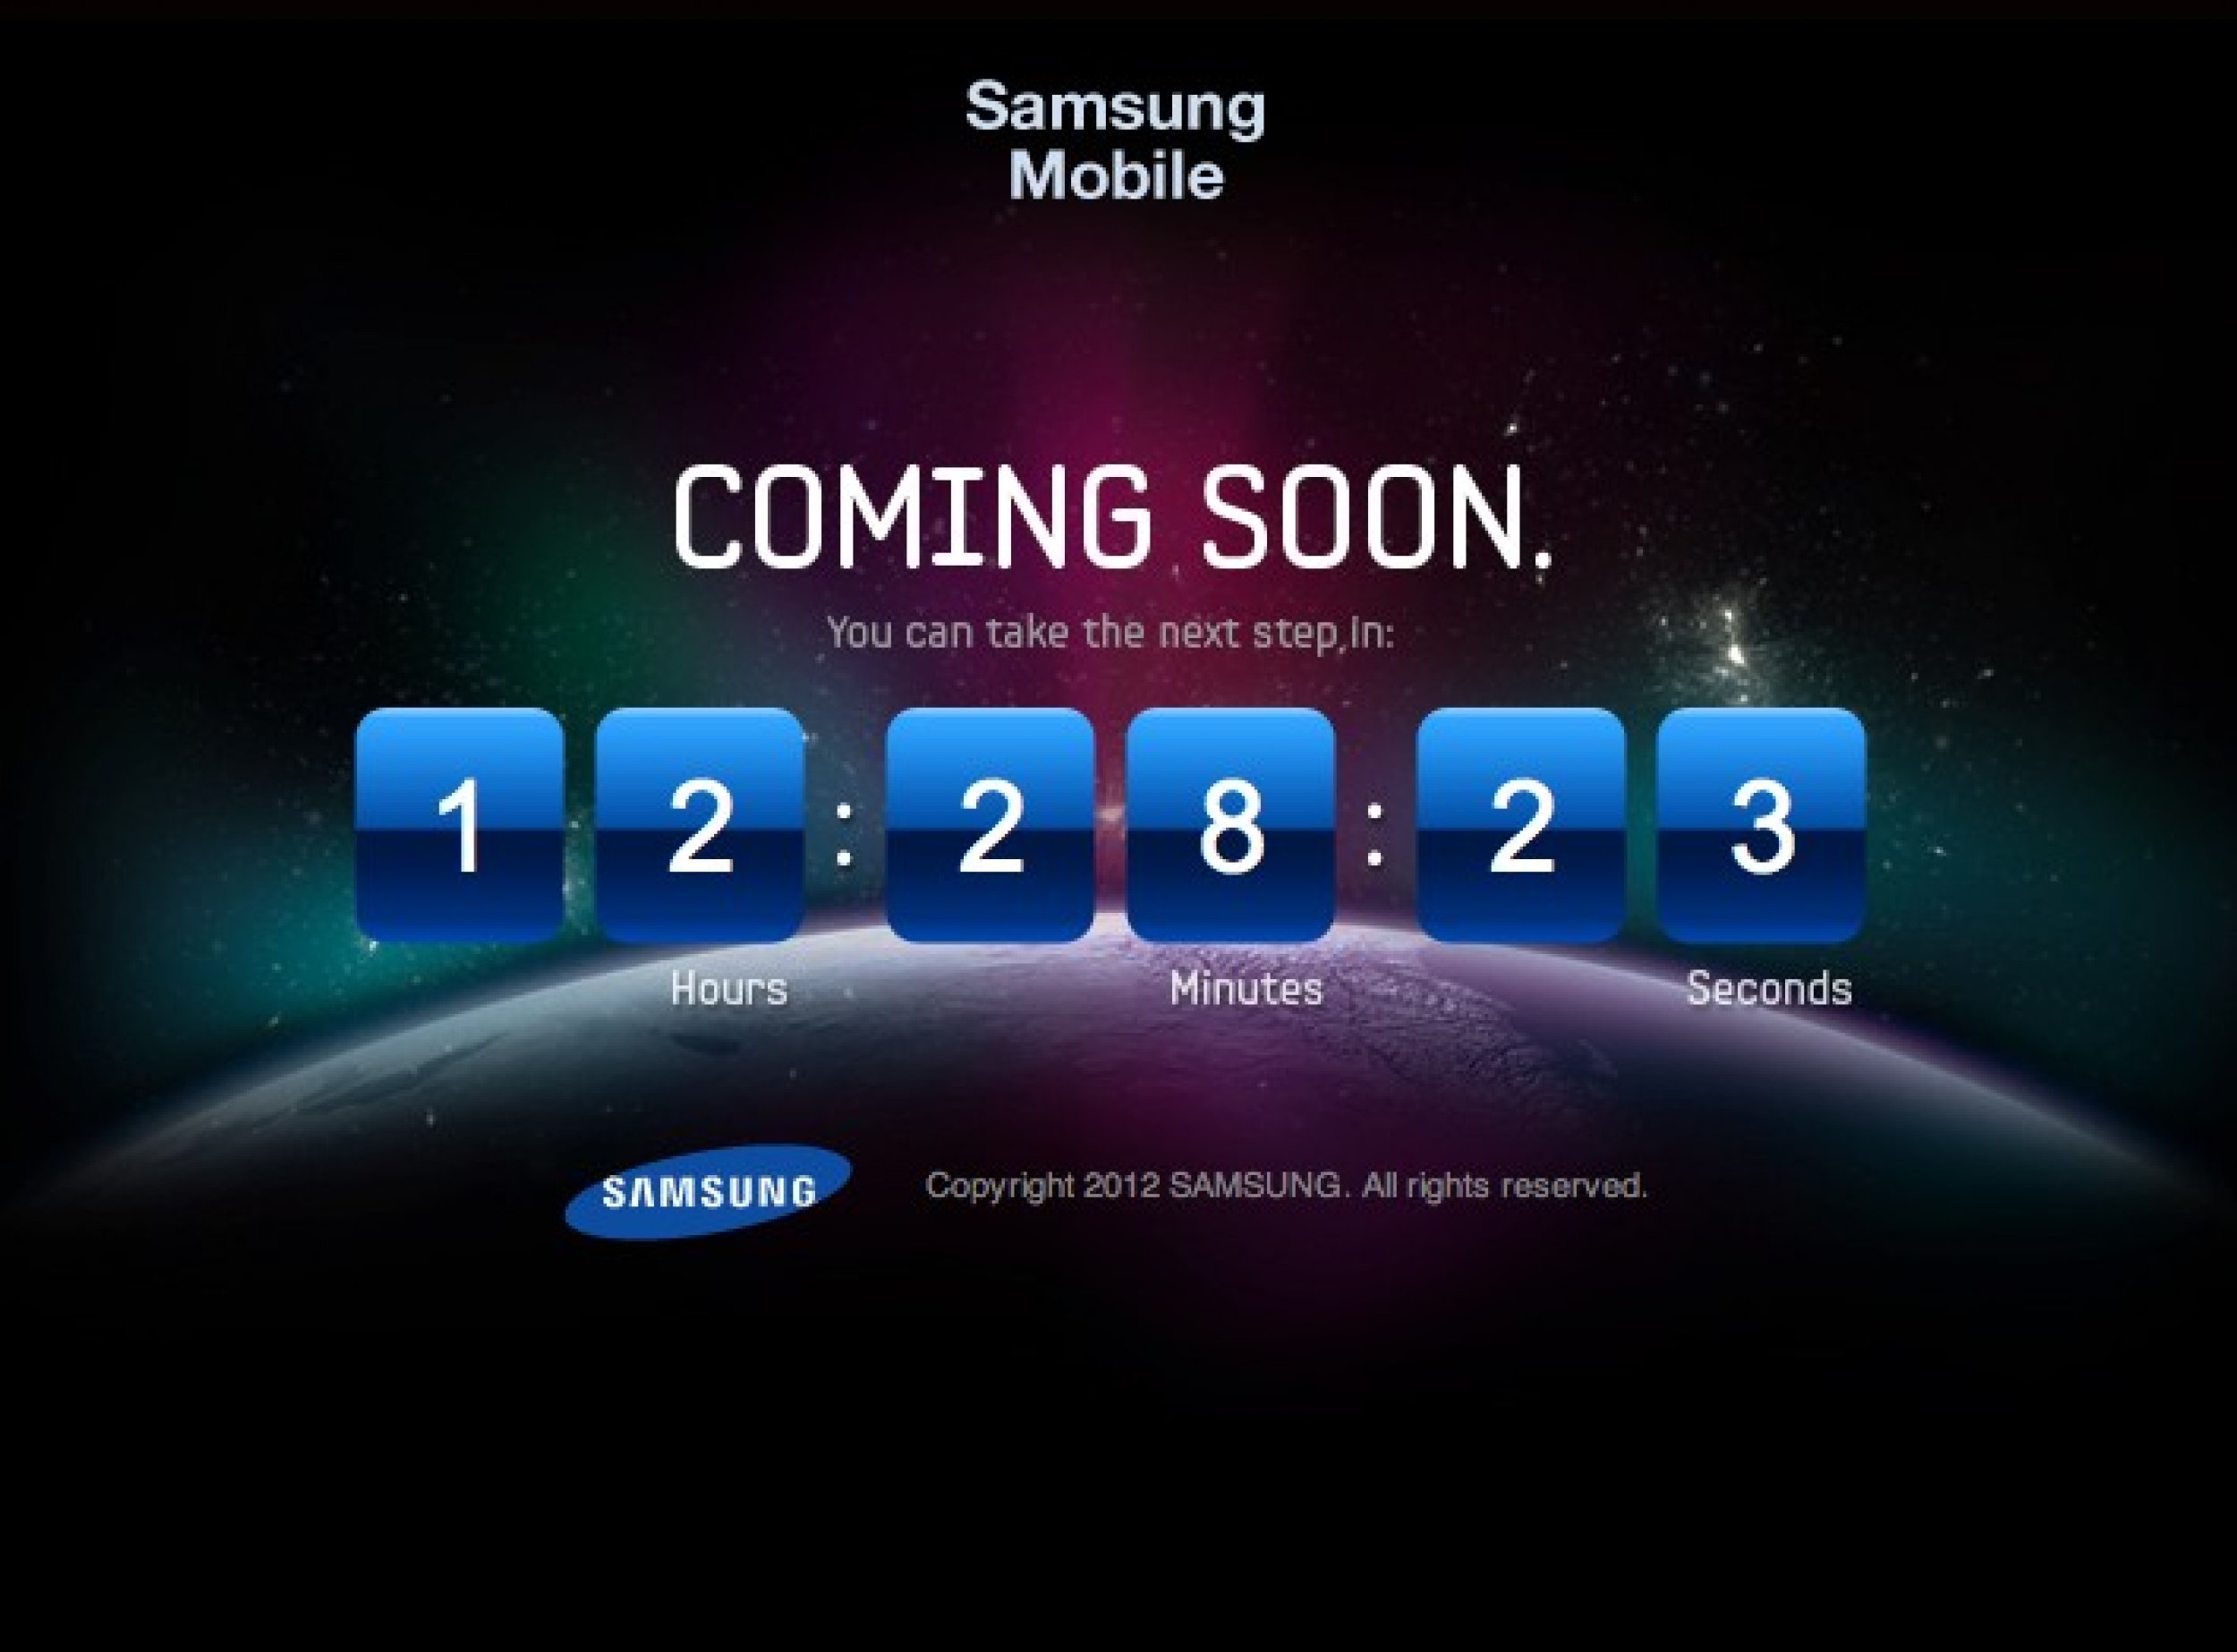 Samsung Galaxy S3 Release Date - Countdown Clock Counted to April 23